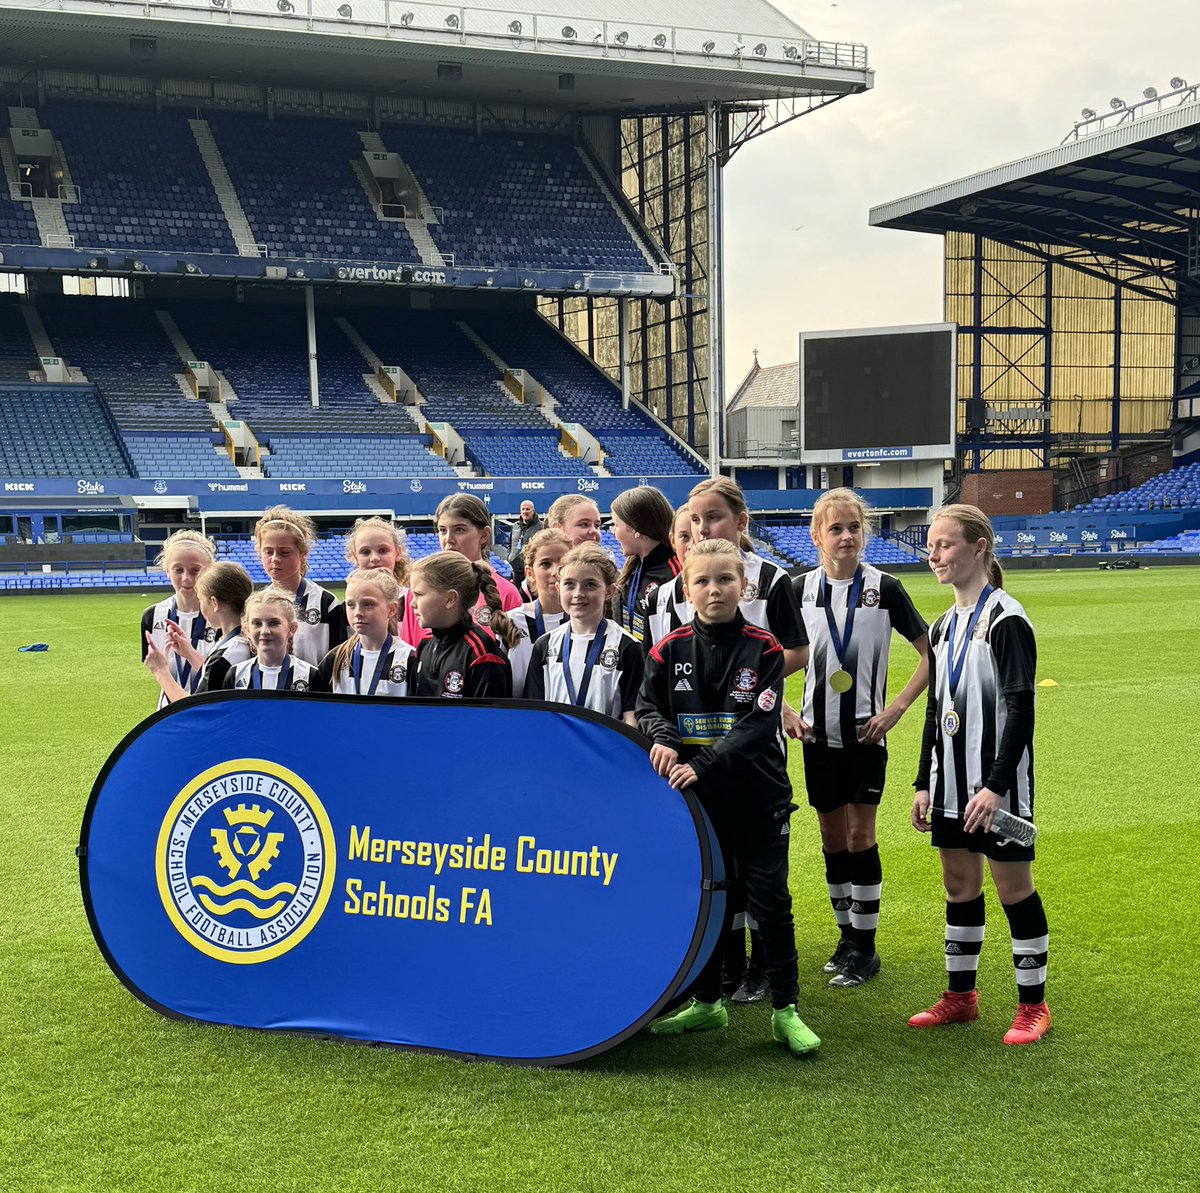 What a great game @Everton tonight!

Both teams battled hard & bucketloads of talent on show. ⚽️ 

Be proud girls - & tell everyone in school tomorrow you’ve played in such a grand old stadium.🏟️

Congratulations to @seftongirls on the win. Well deserved.👏 

#MemoriesMade